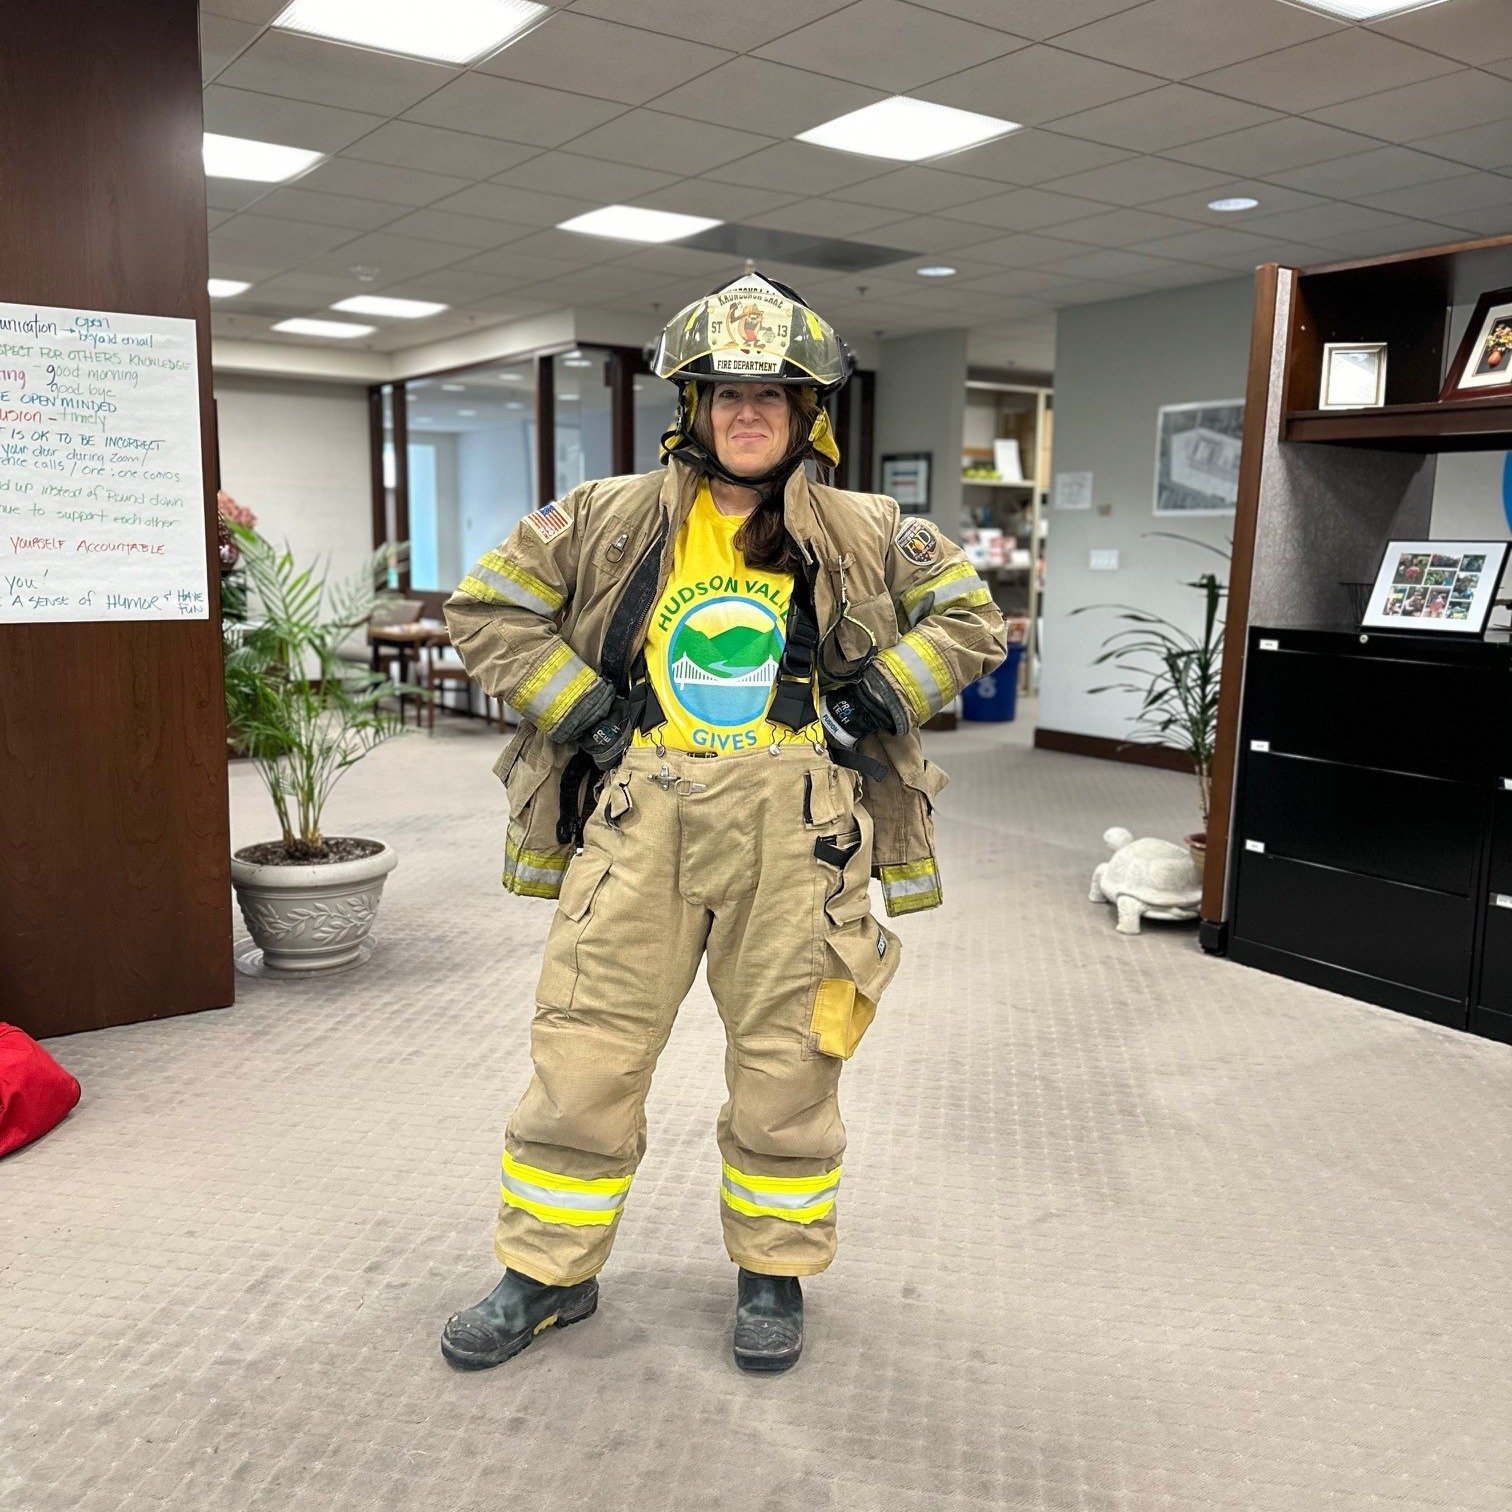 🚒 Did you know that the average turn-out gear for a firefighter costs the department over $5,000 per person? 

Below is our CEO, Denise Frangipane, in turn-out gear. The Sullivan 180 staff did a fun challenge to see if we could put on the gear in un